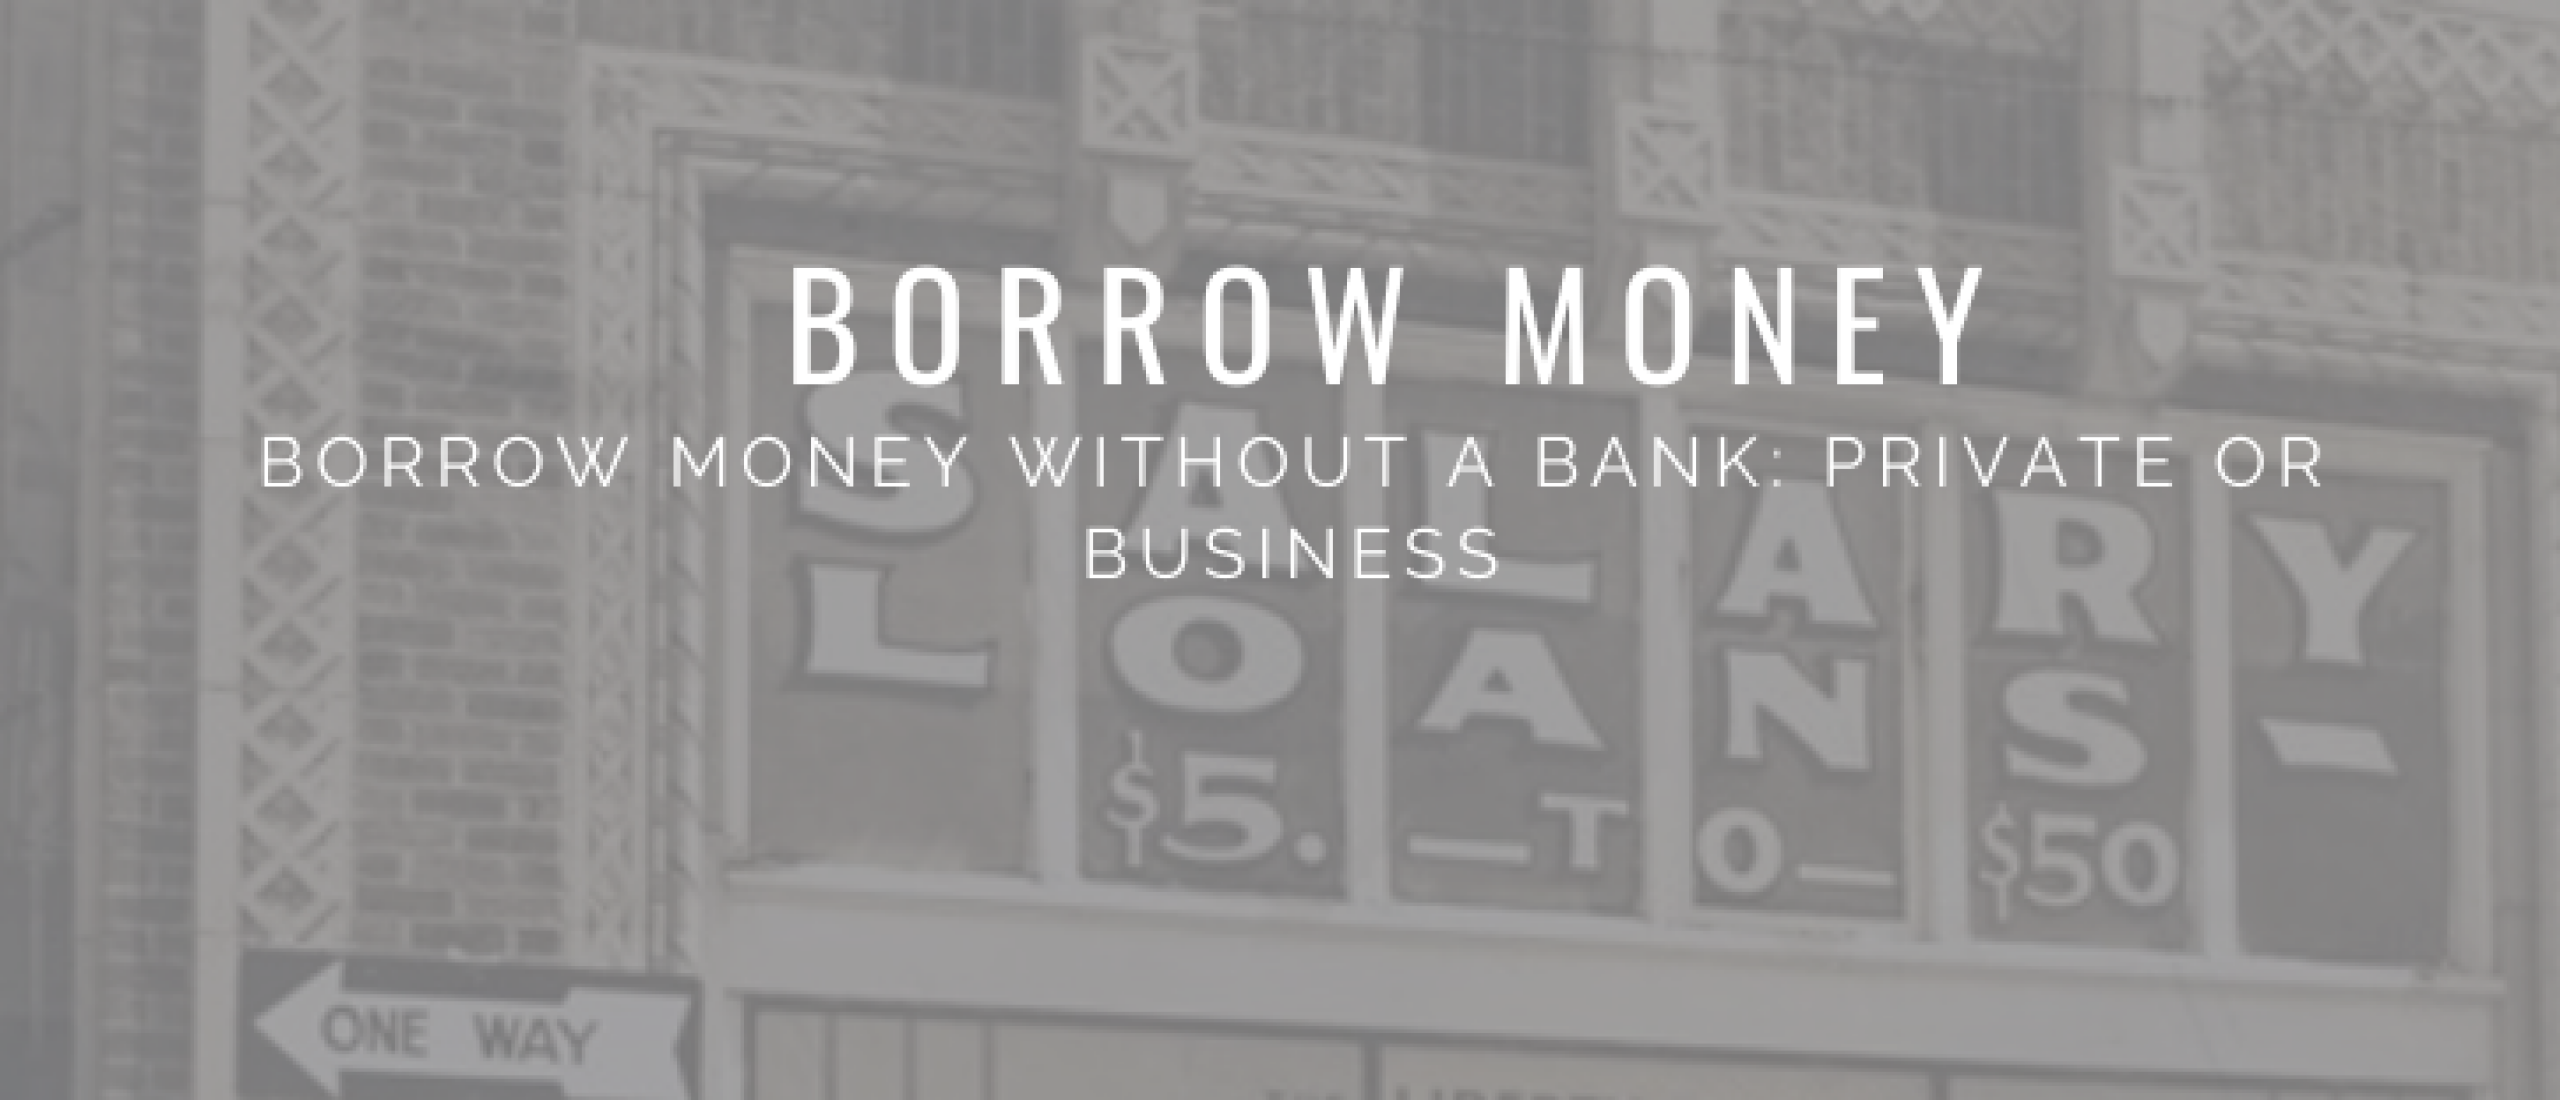 Borrow Money Without a Bank: Private or Business